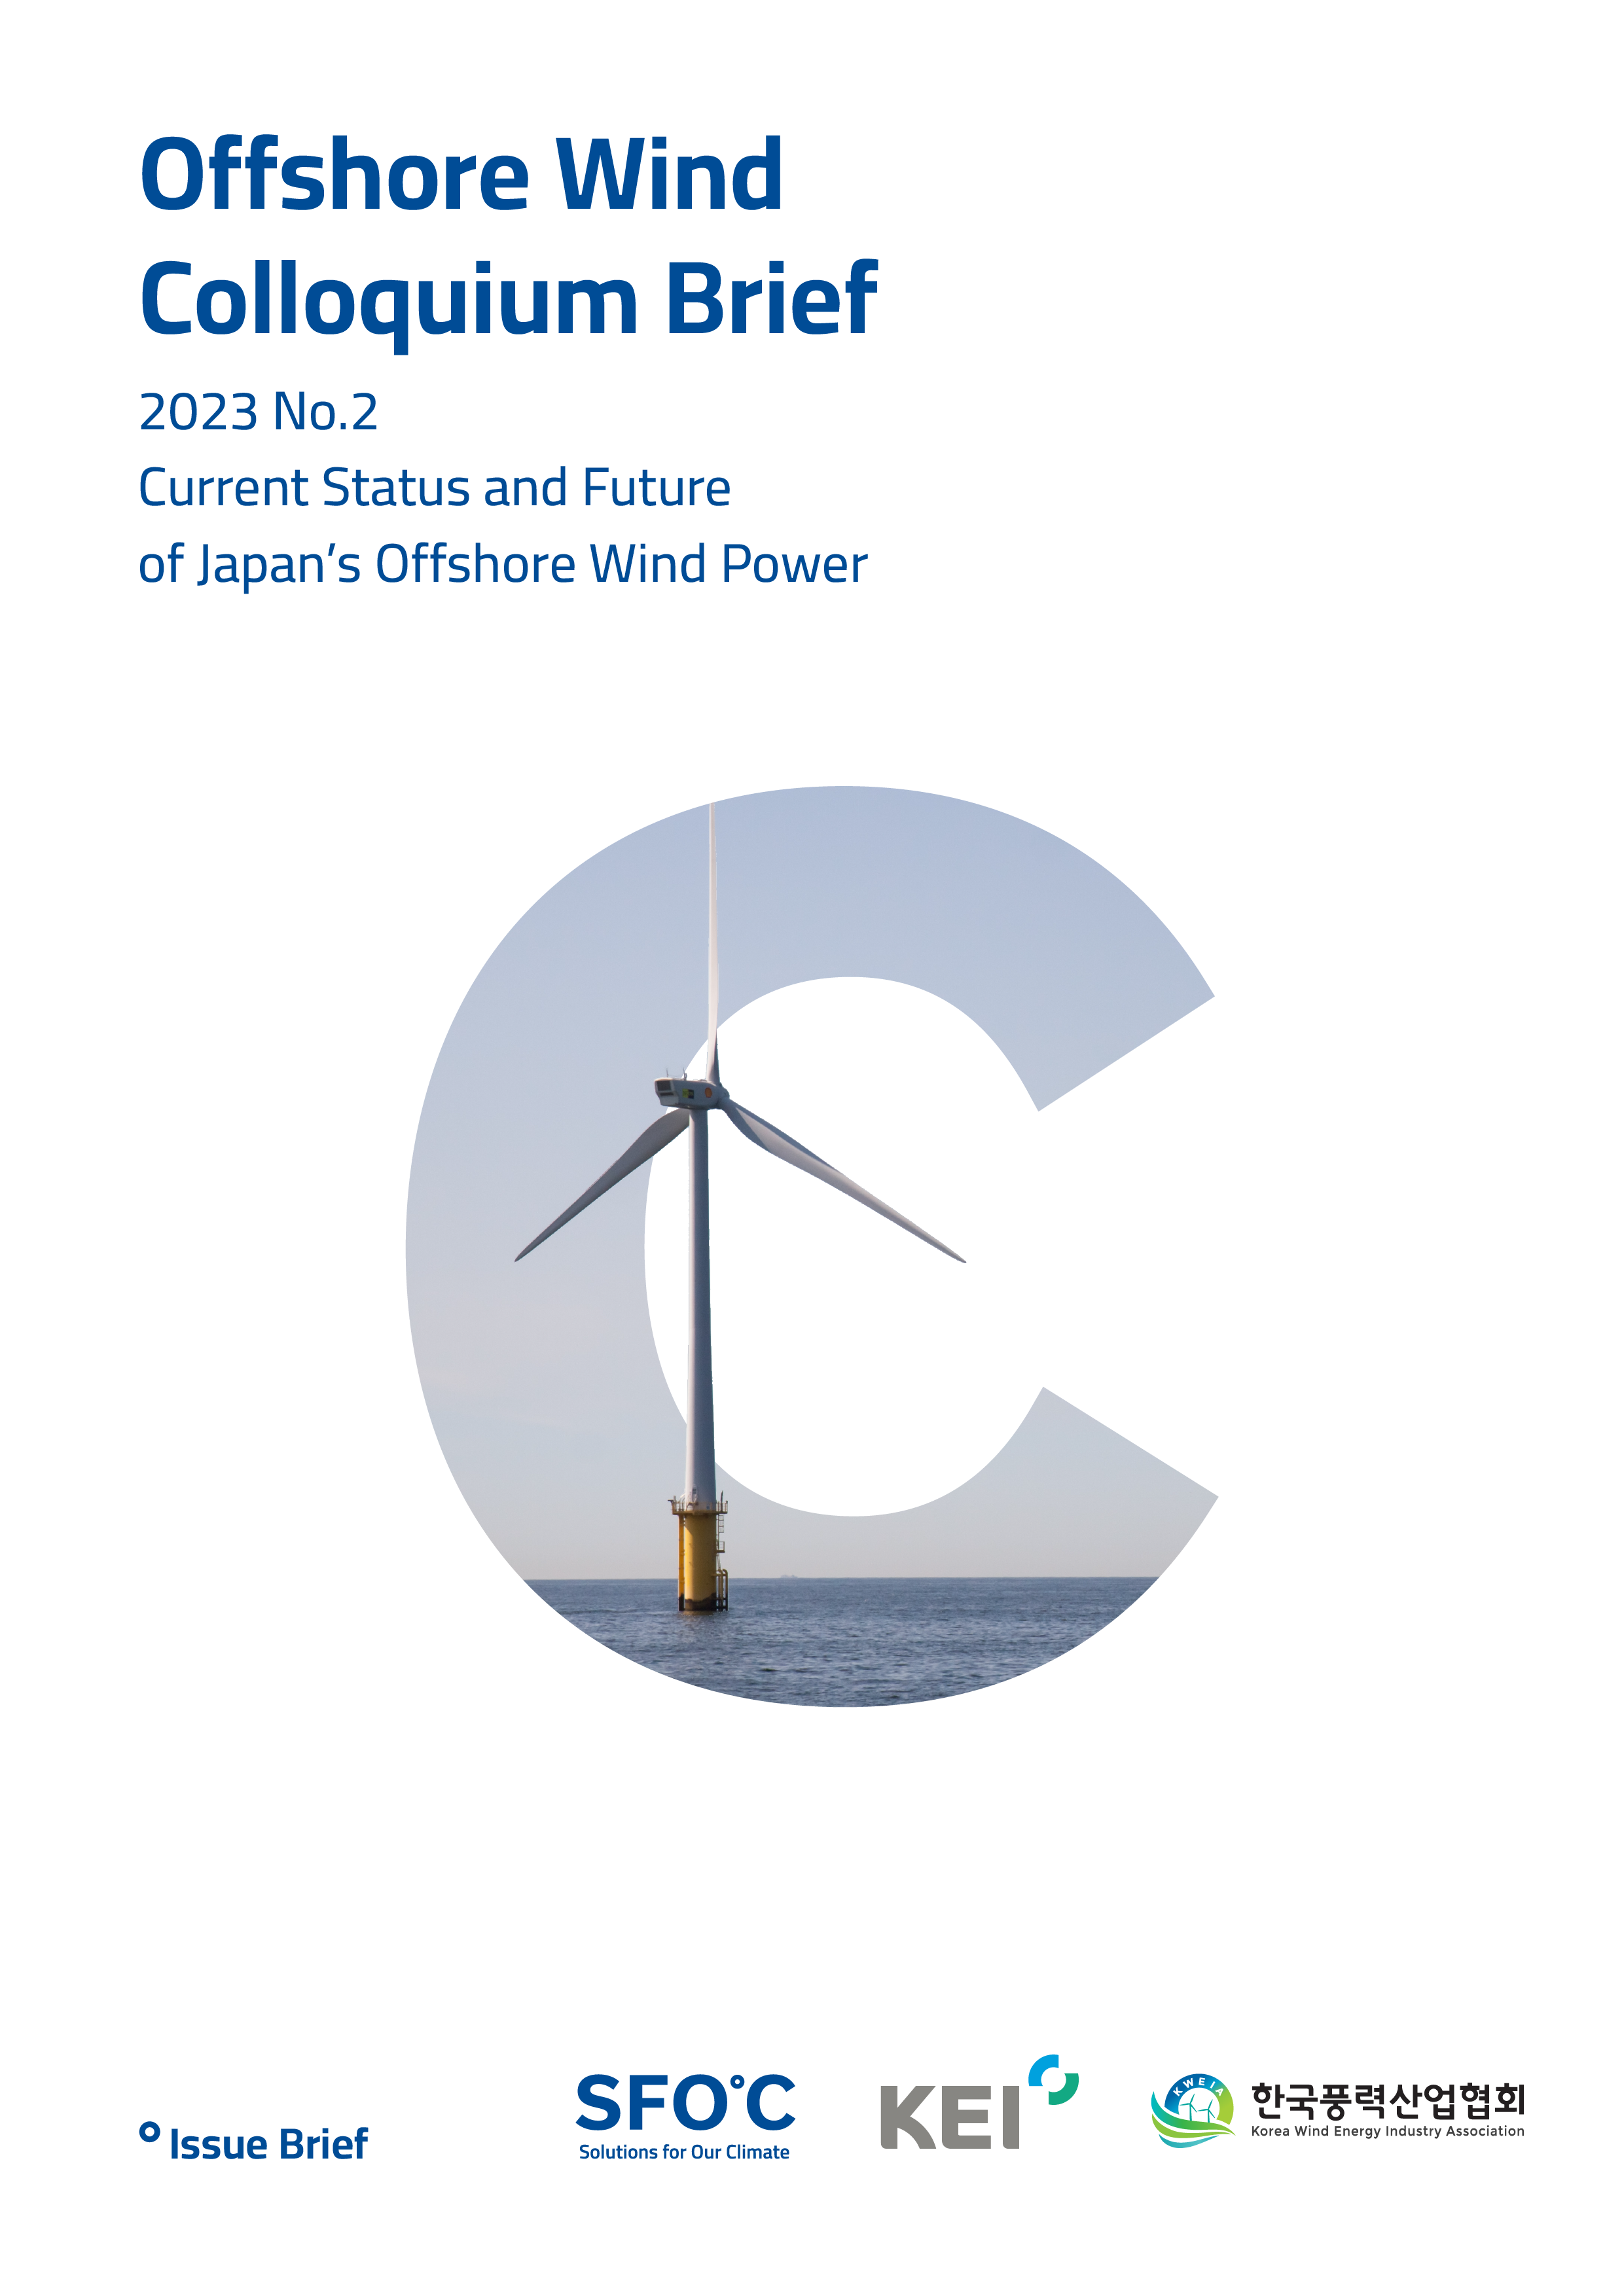 Offshore Wind Colloquium Brief No.2 - Current Status and Future of Japan’s Offshore Wind Power